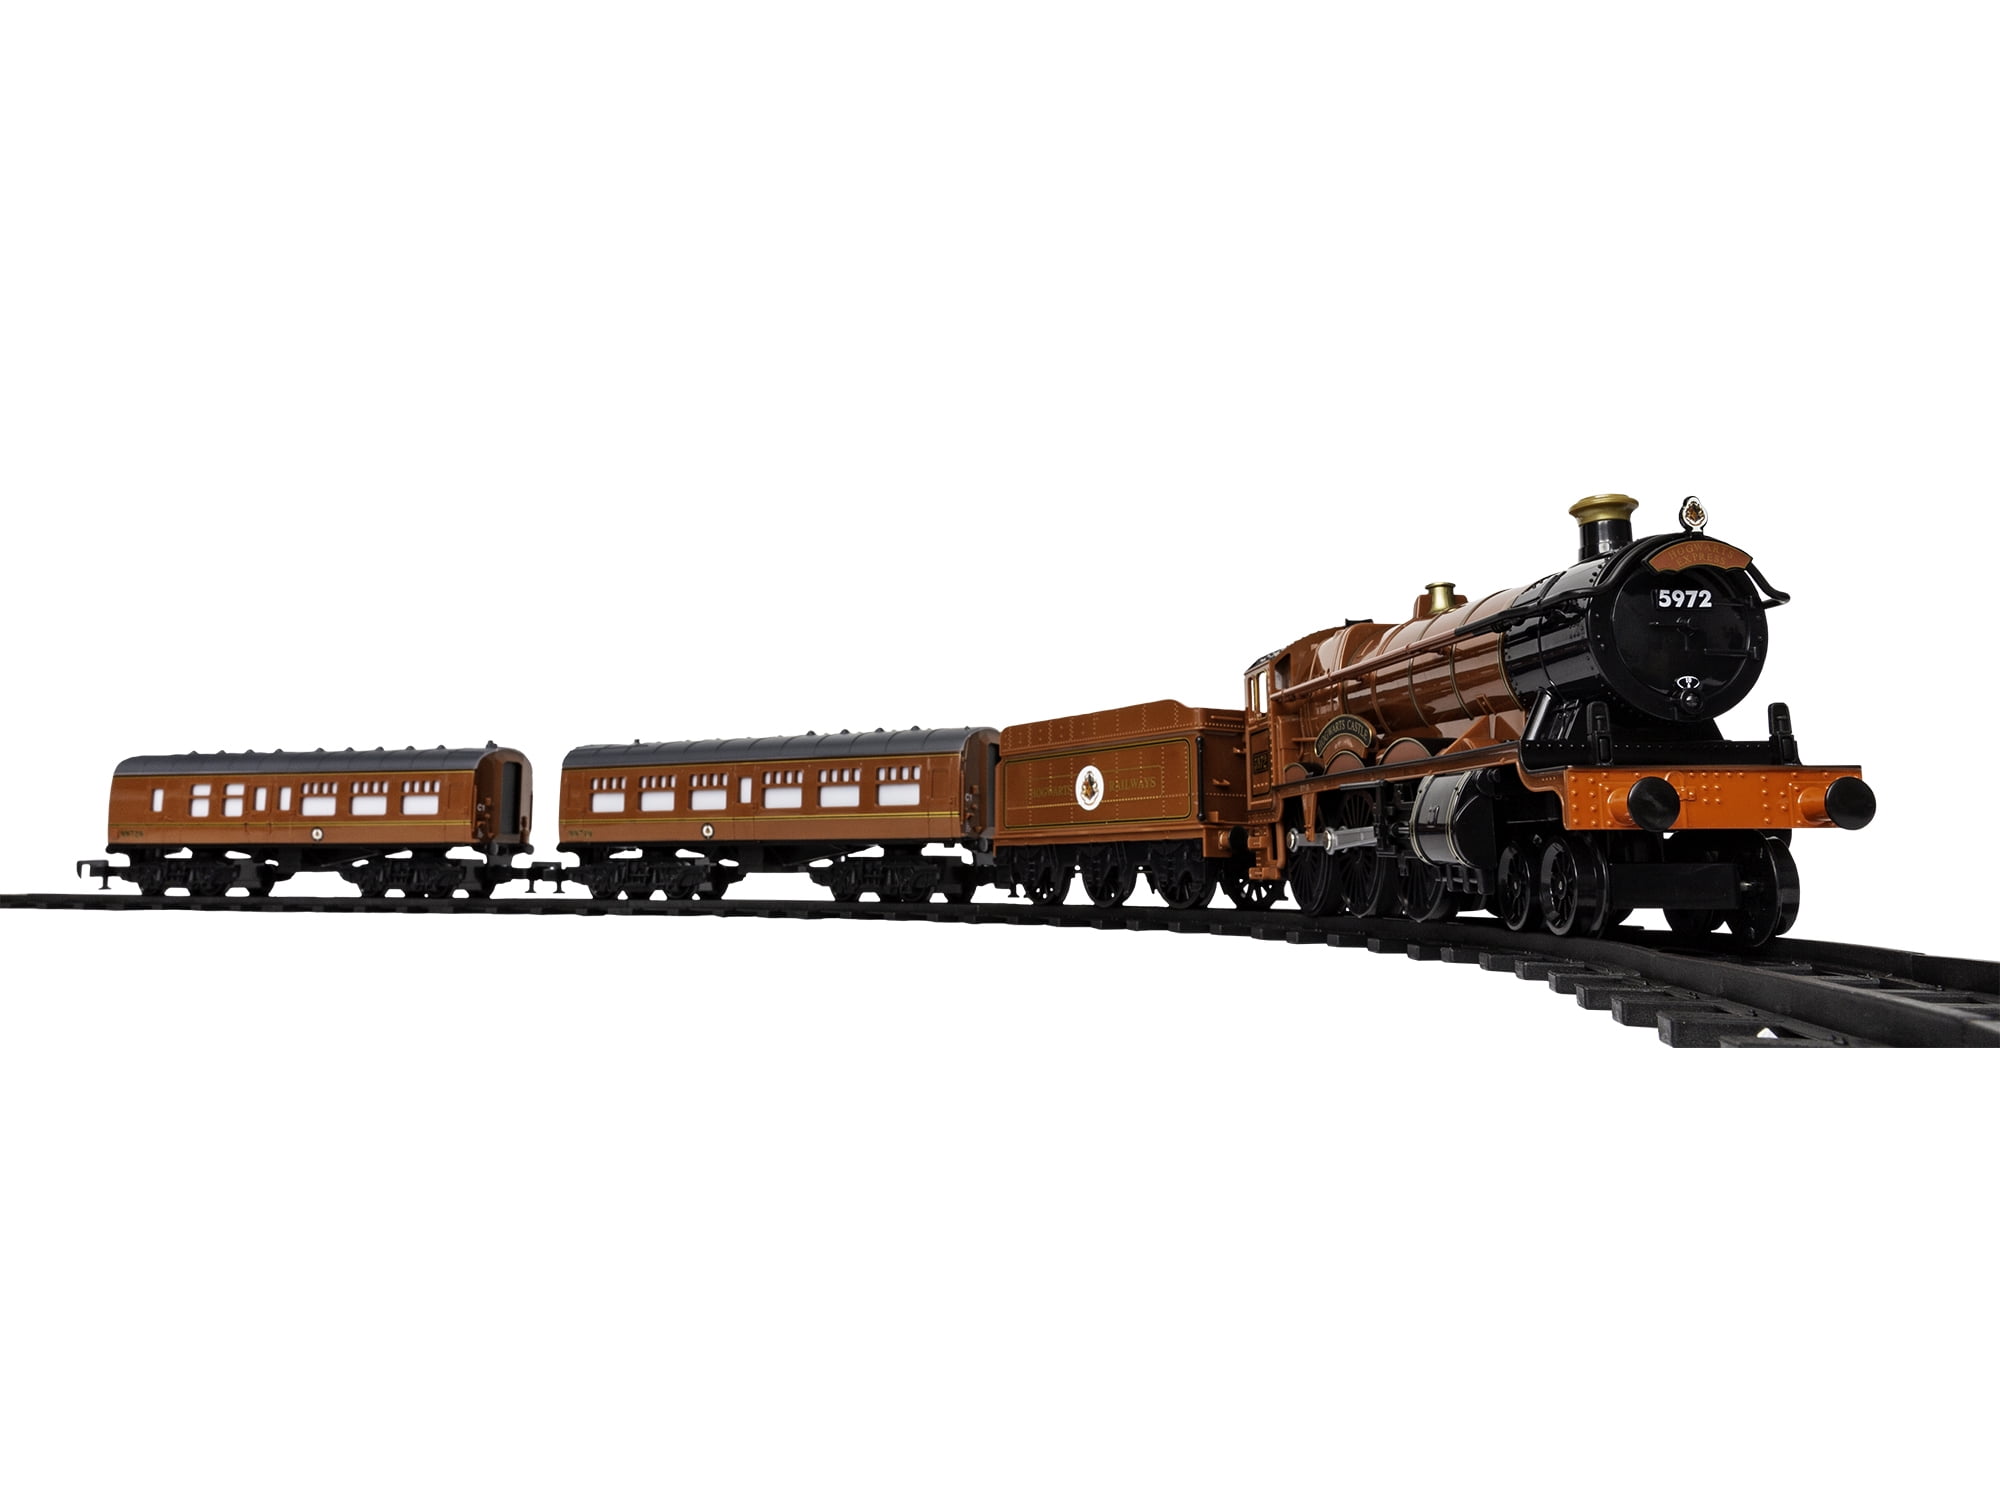 Lionel Hogwarts Express Battery-powered Model Train Set Ready to Play with Remot 